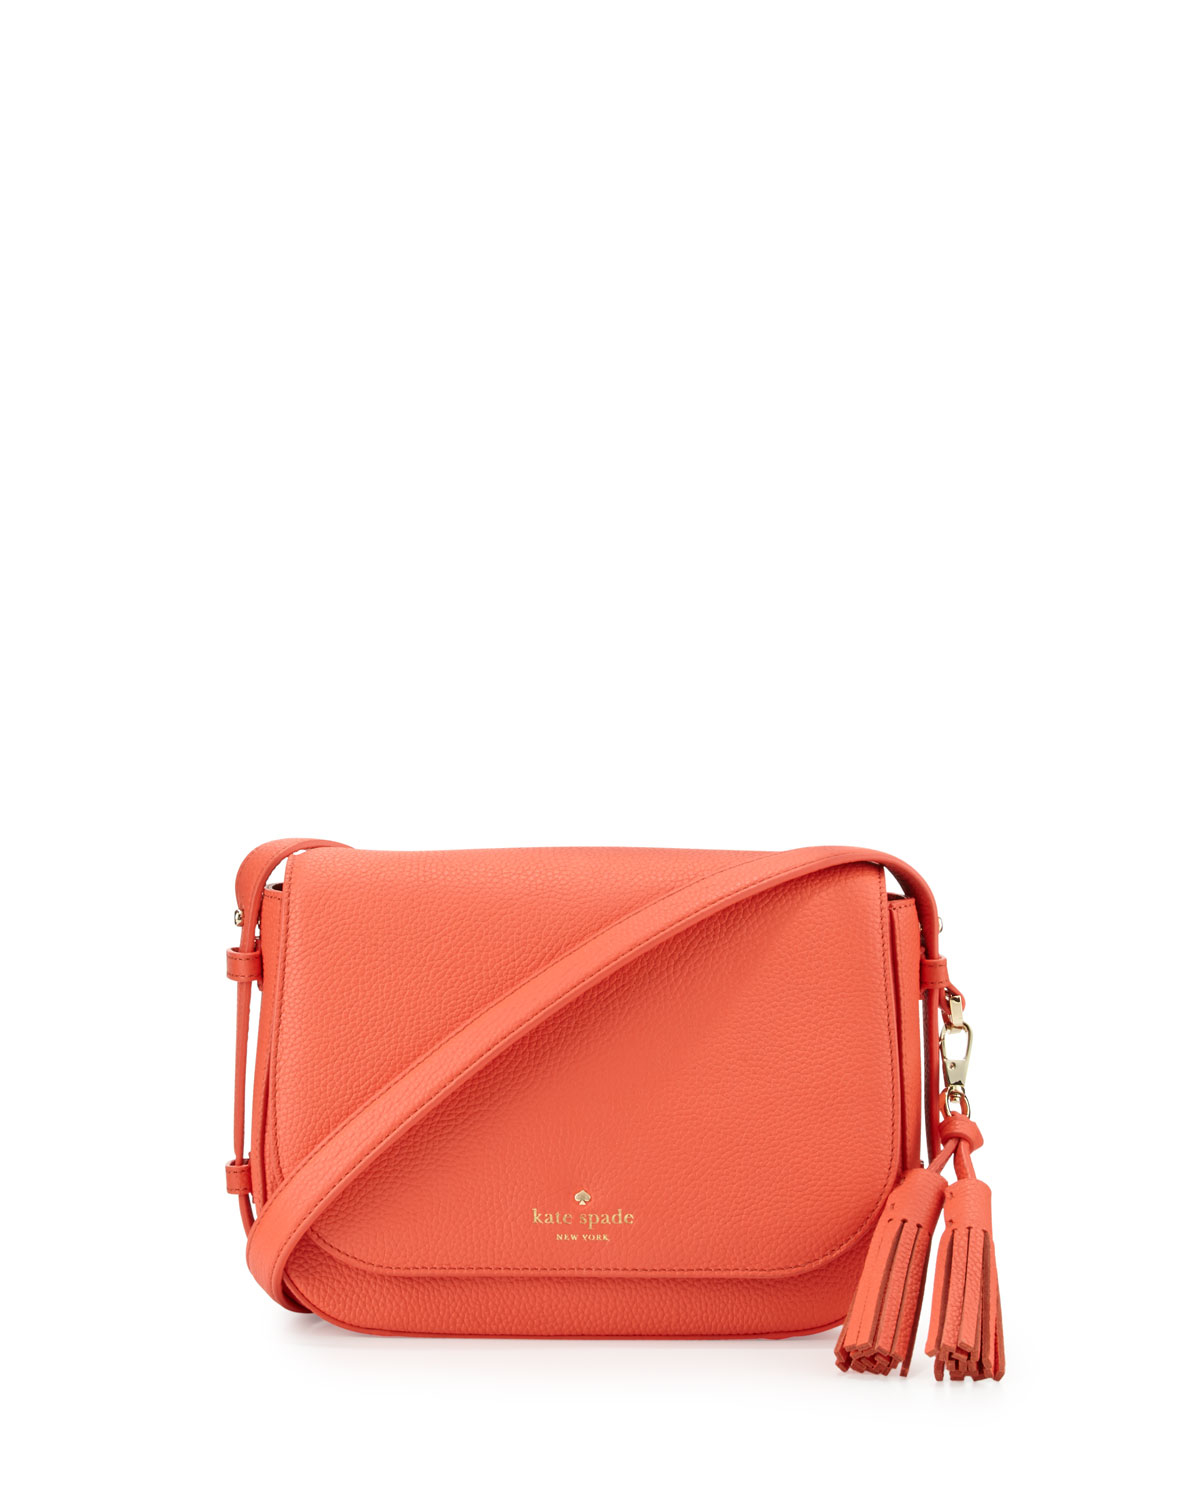 Kate spade new york Orchard Street Penelope Crossbody Bag in Red | Lyst